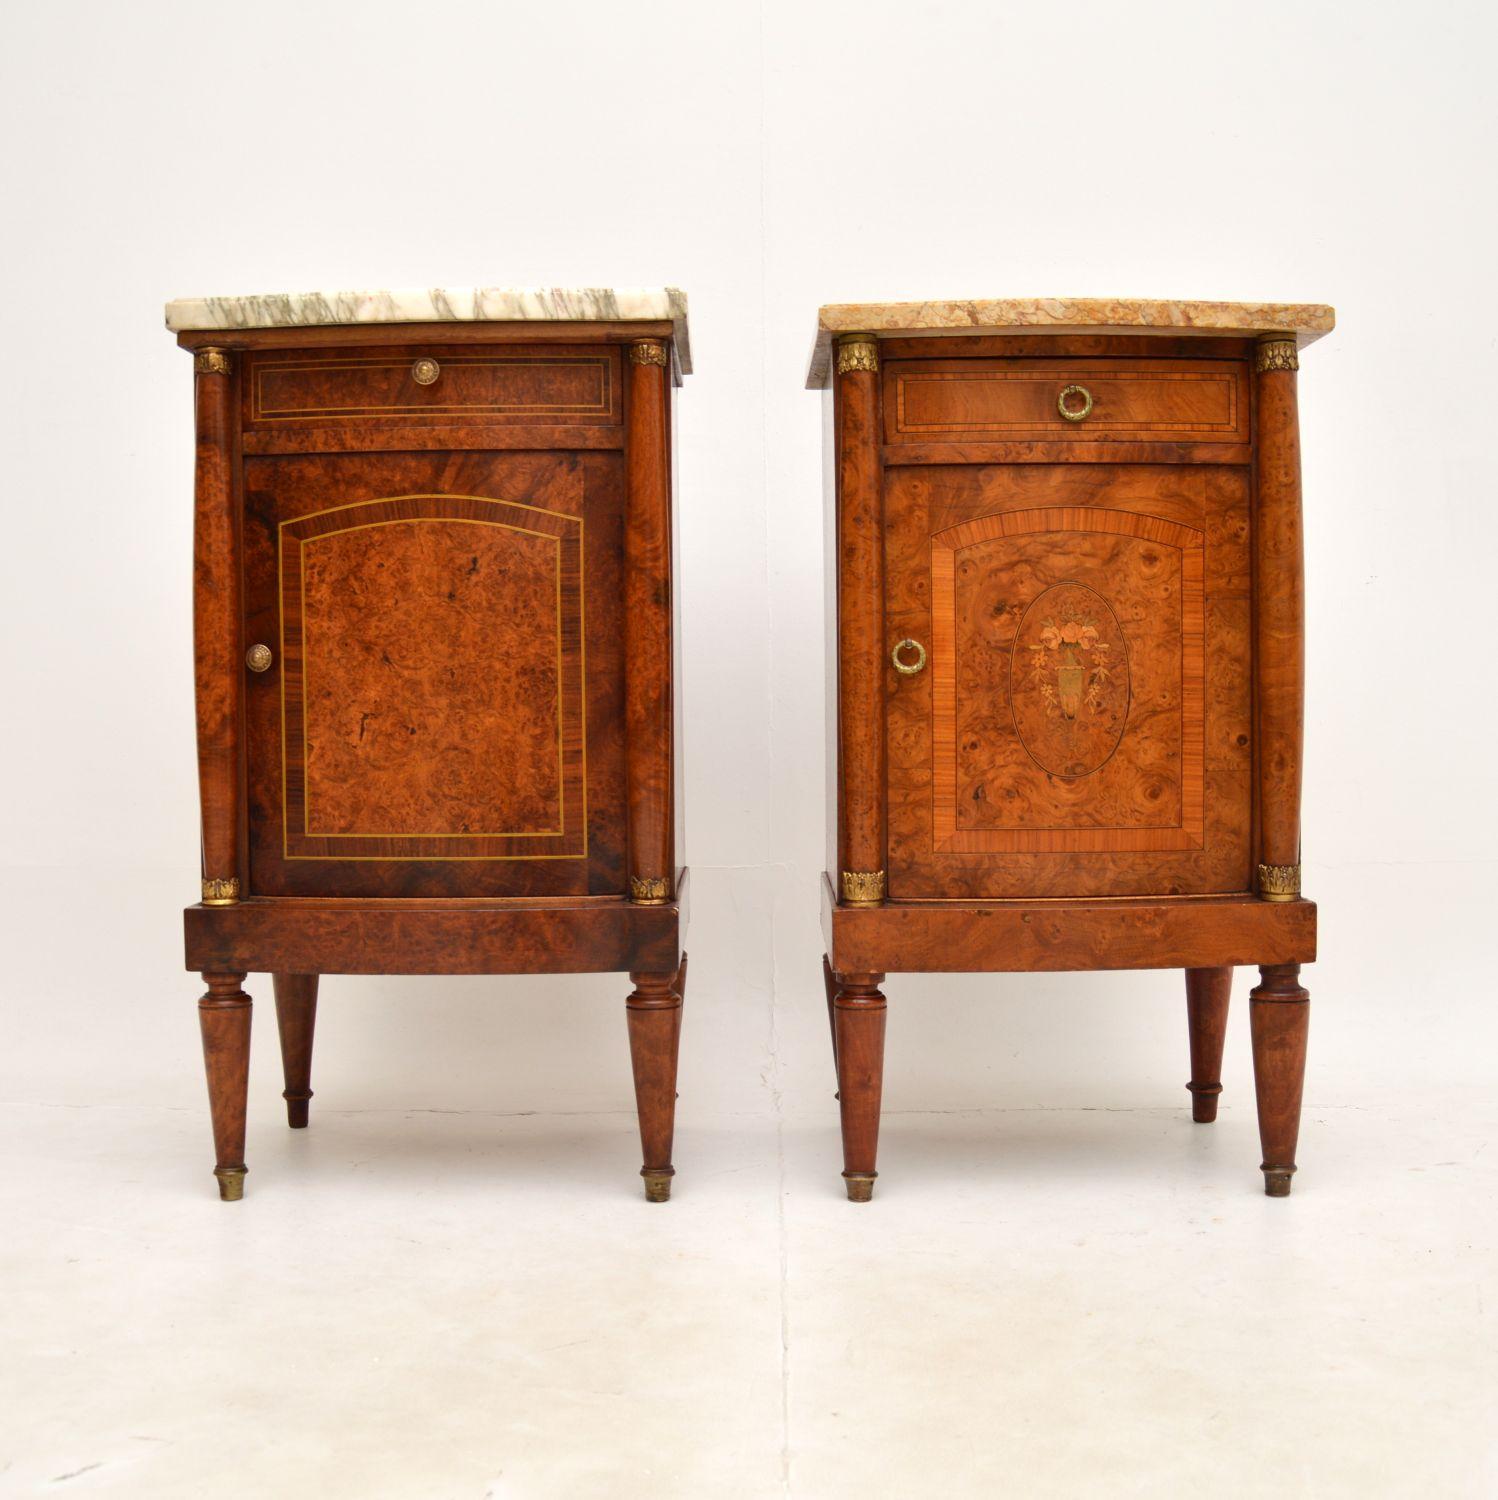 A stunning matched pair of antique French marble top bedside cabinets, dating from around the 1890-1900 period.

They are of superb quality, predominantly burr walnut which has gorgeous grain patterns and colour tones, the doors also have amazing